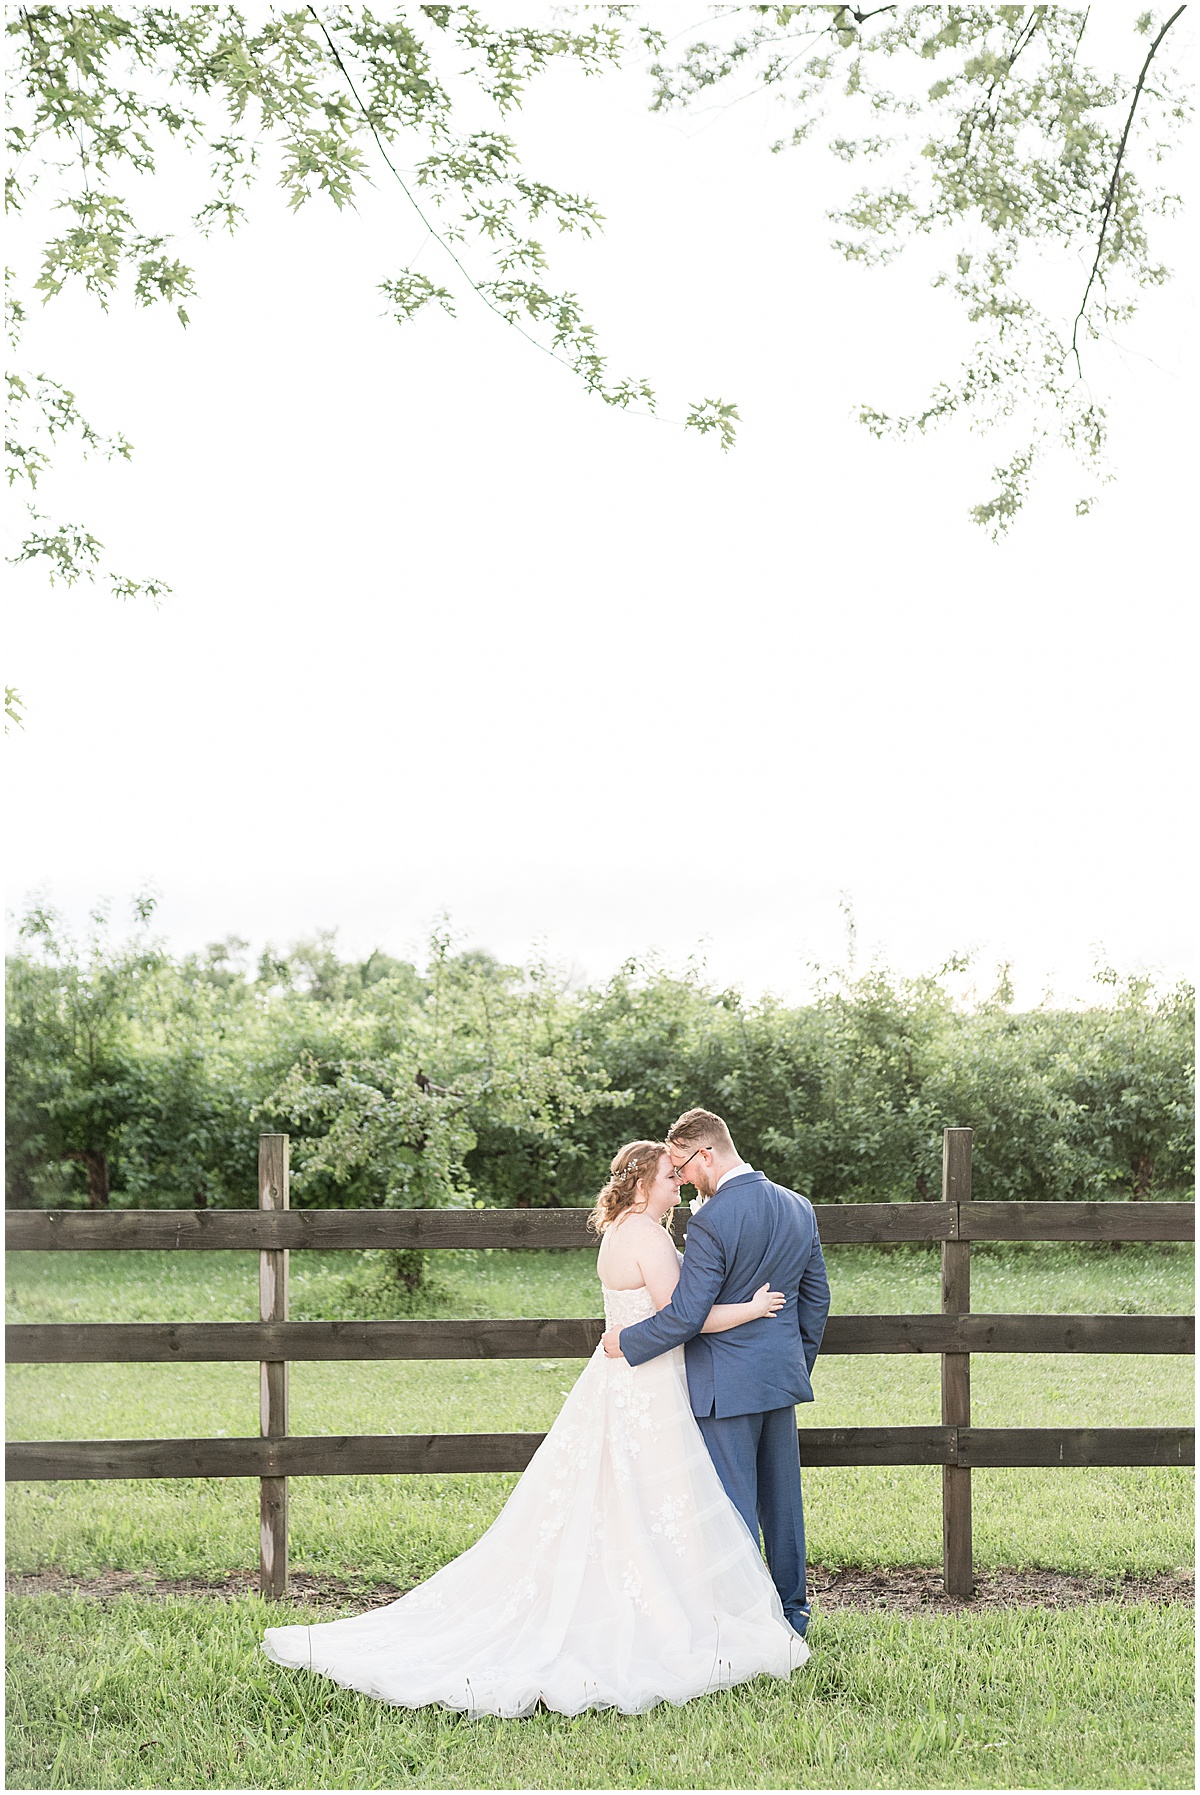 Bride and groom sunset photos at County Line Orchard wedding in Hobart, Indiana